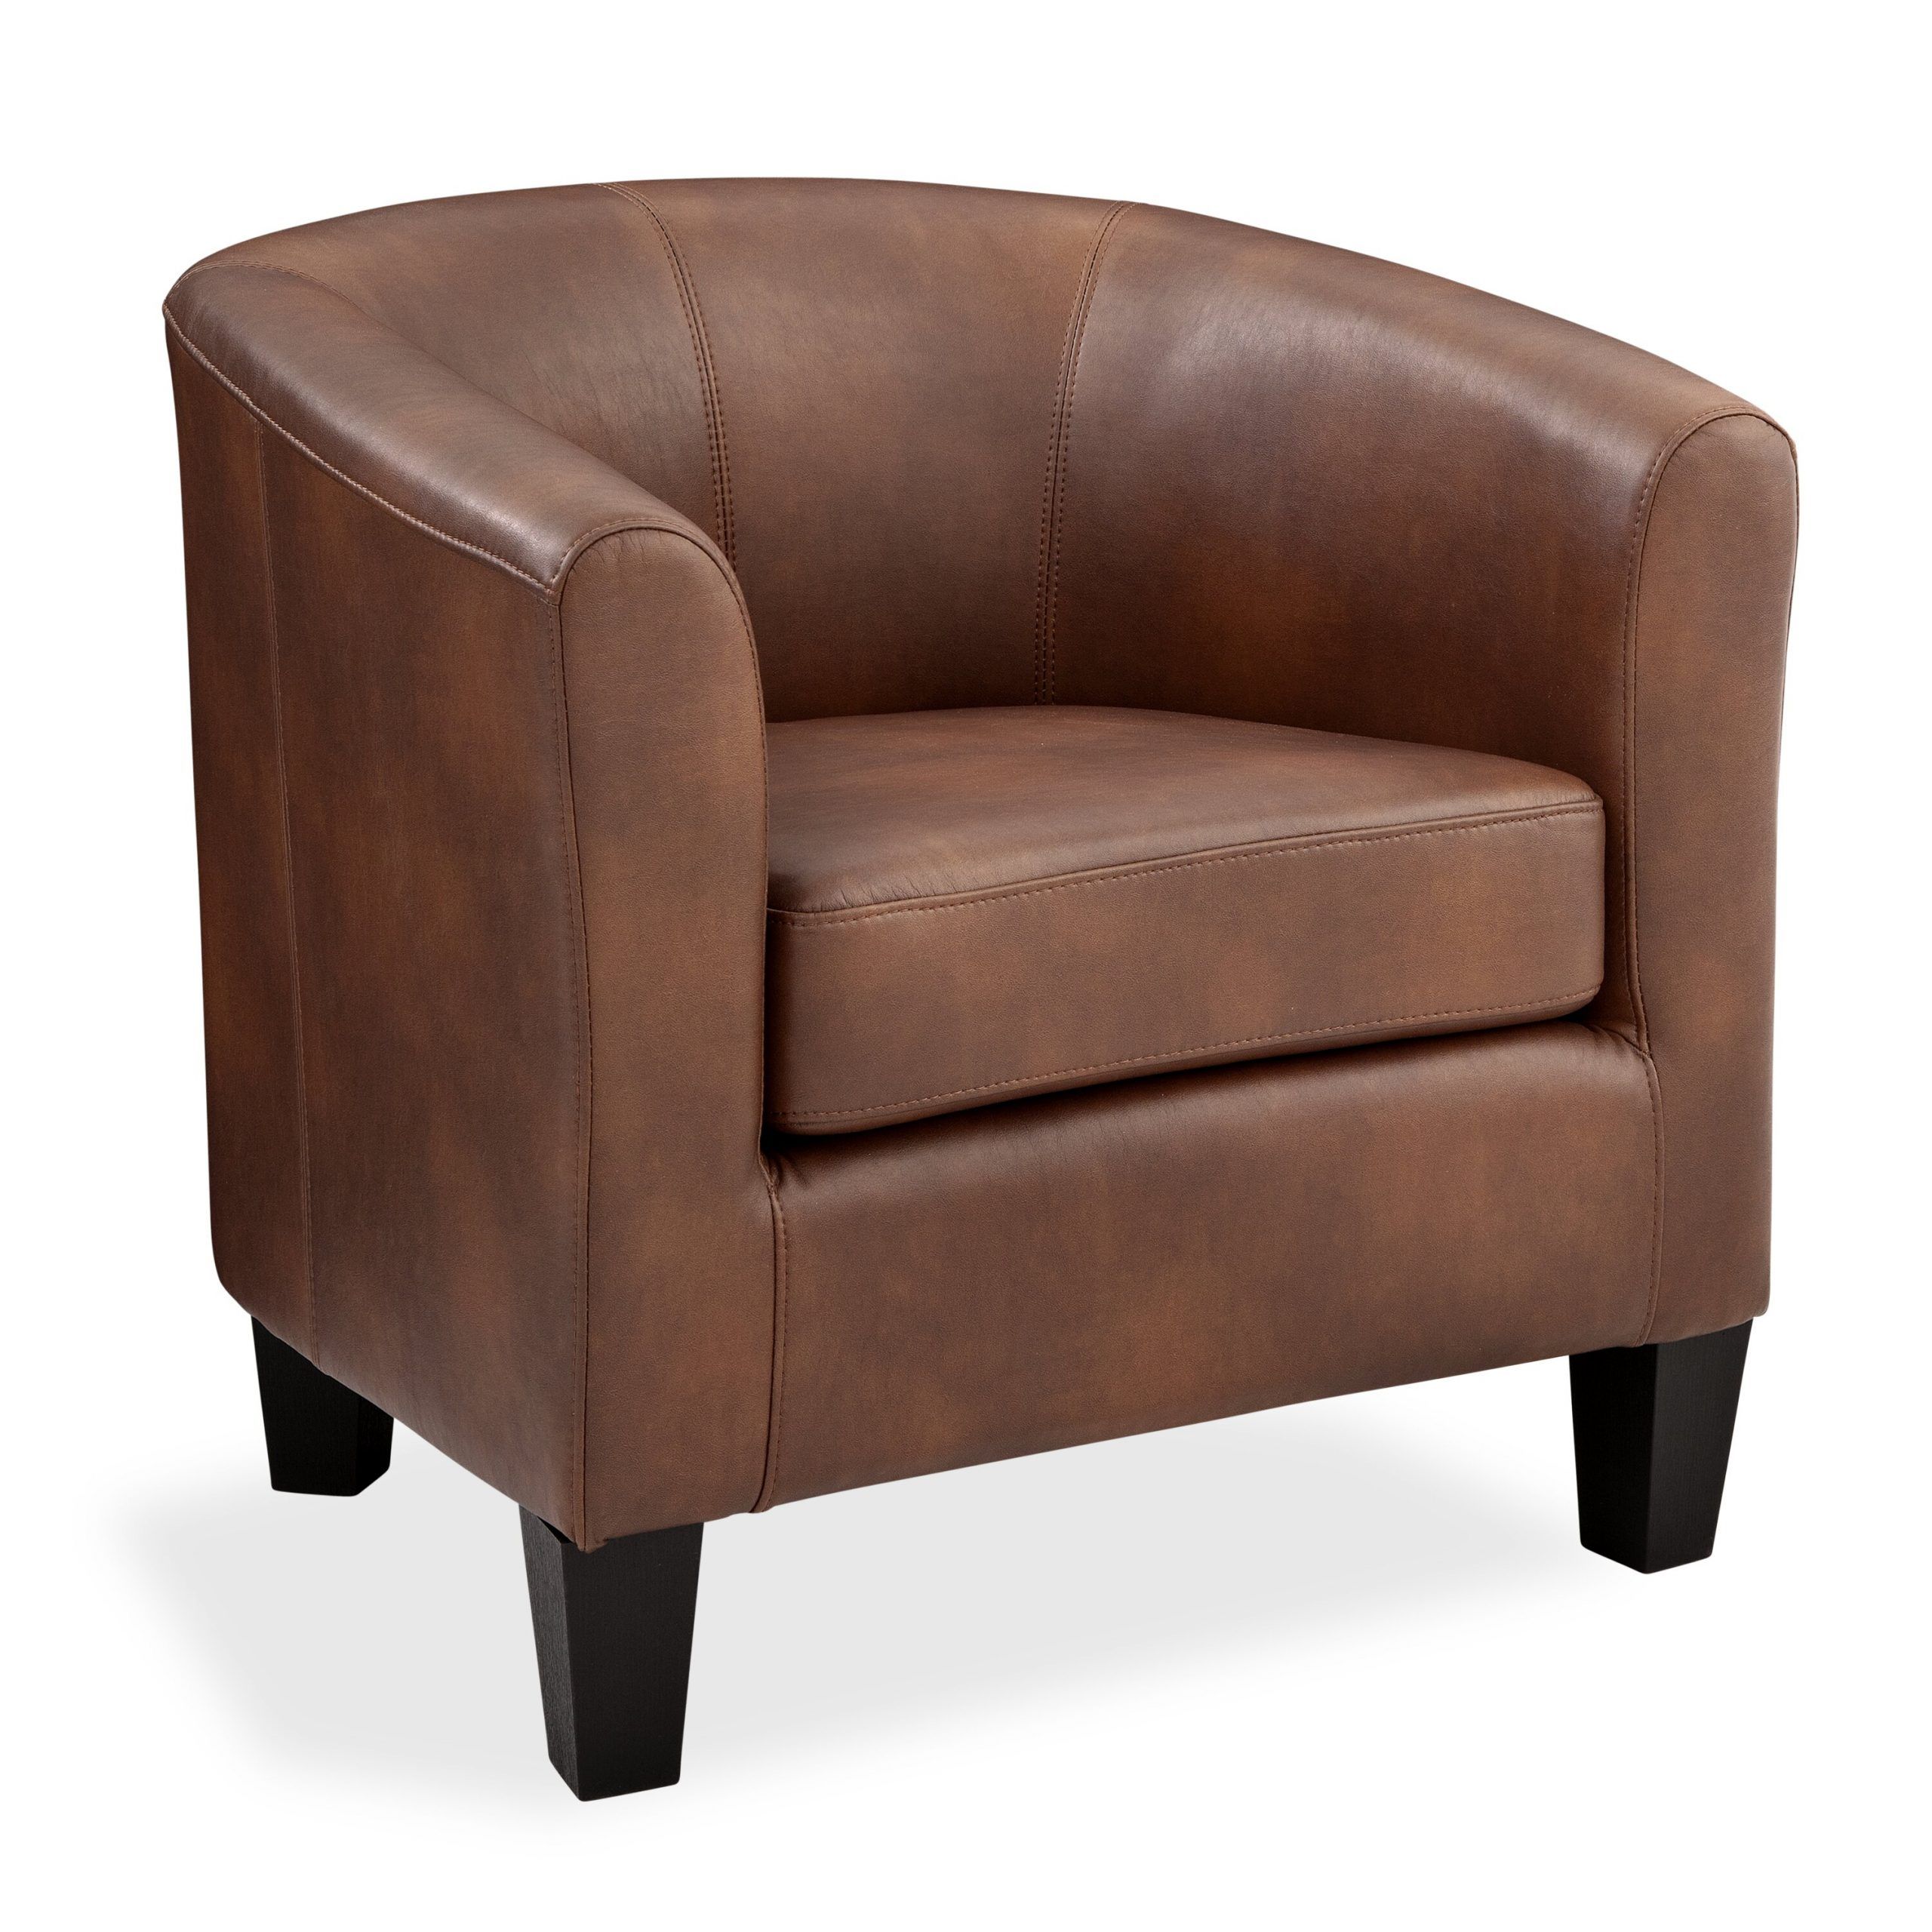 Colden 30" W Faux Leather Barrel Chair Intended For Liam Faux Leather Barrel Chairs (View 8 of 15)